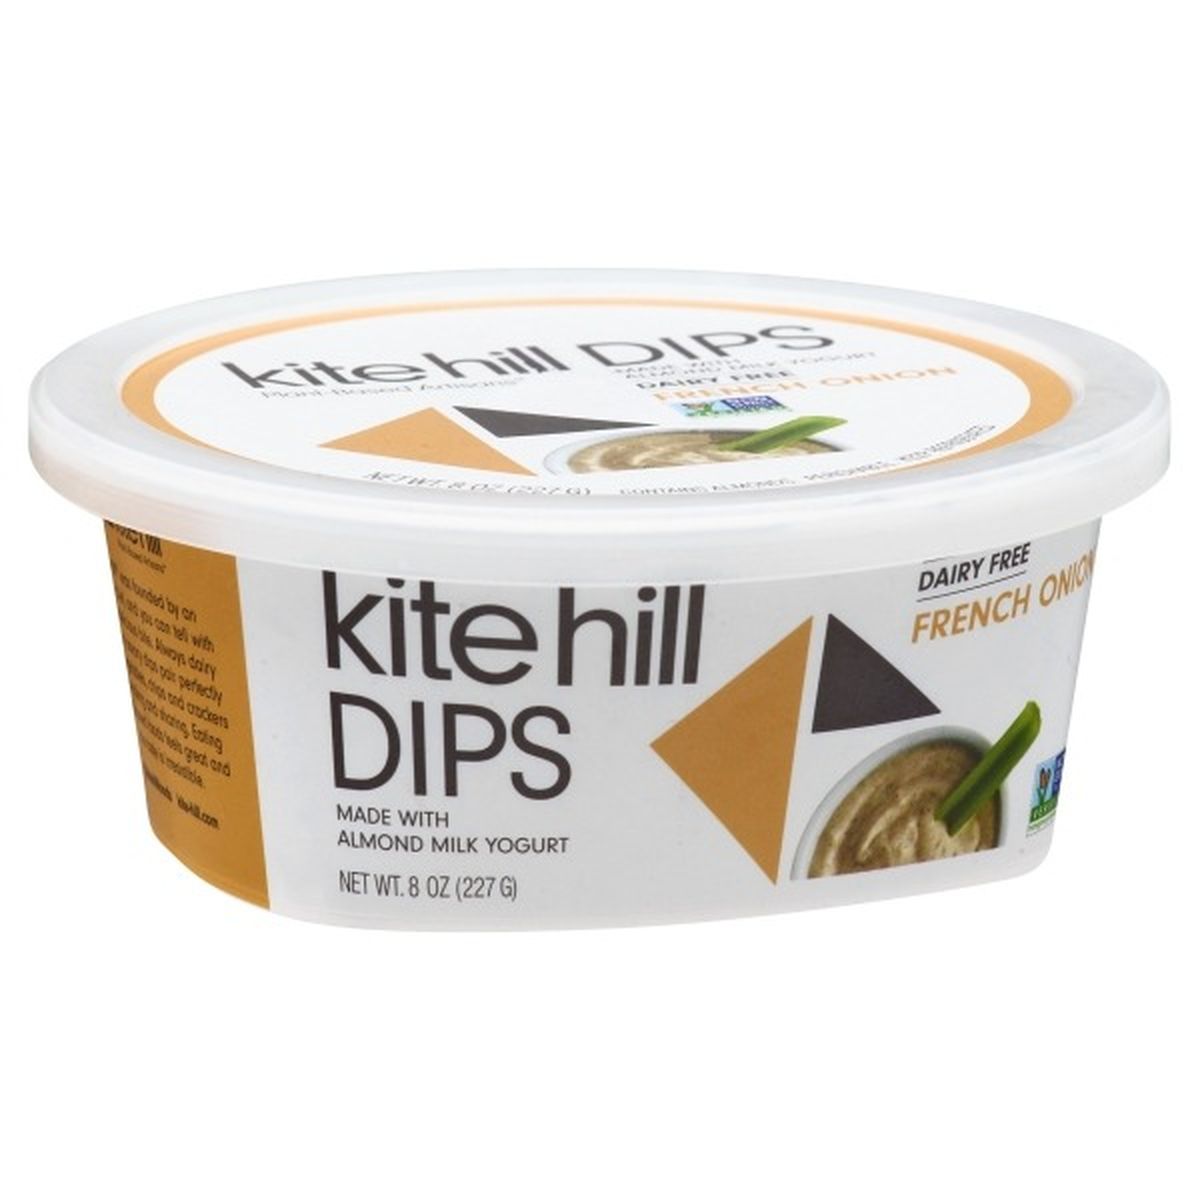 Calories in Kite Hill Dip, Dairy Free, French Onion